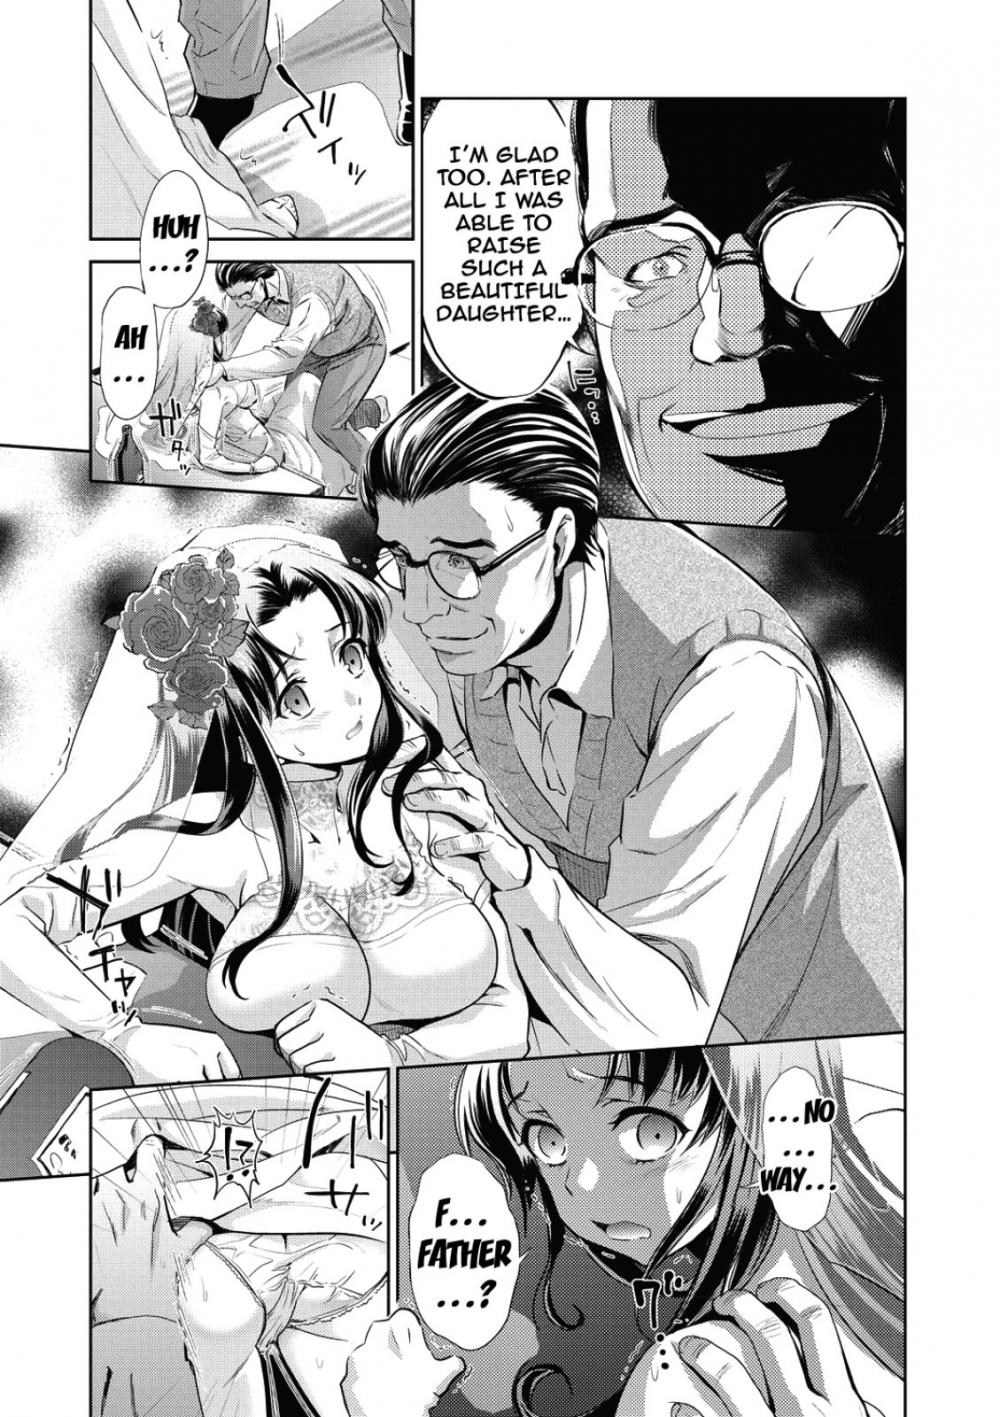 Hentai Manga Comic-From Now On She'll Be Doing NTR-Chapter 7-7